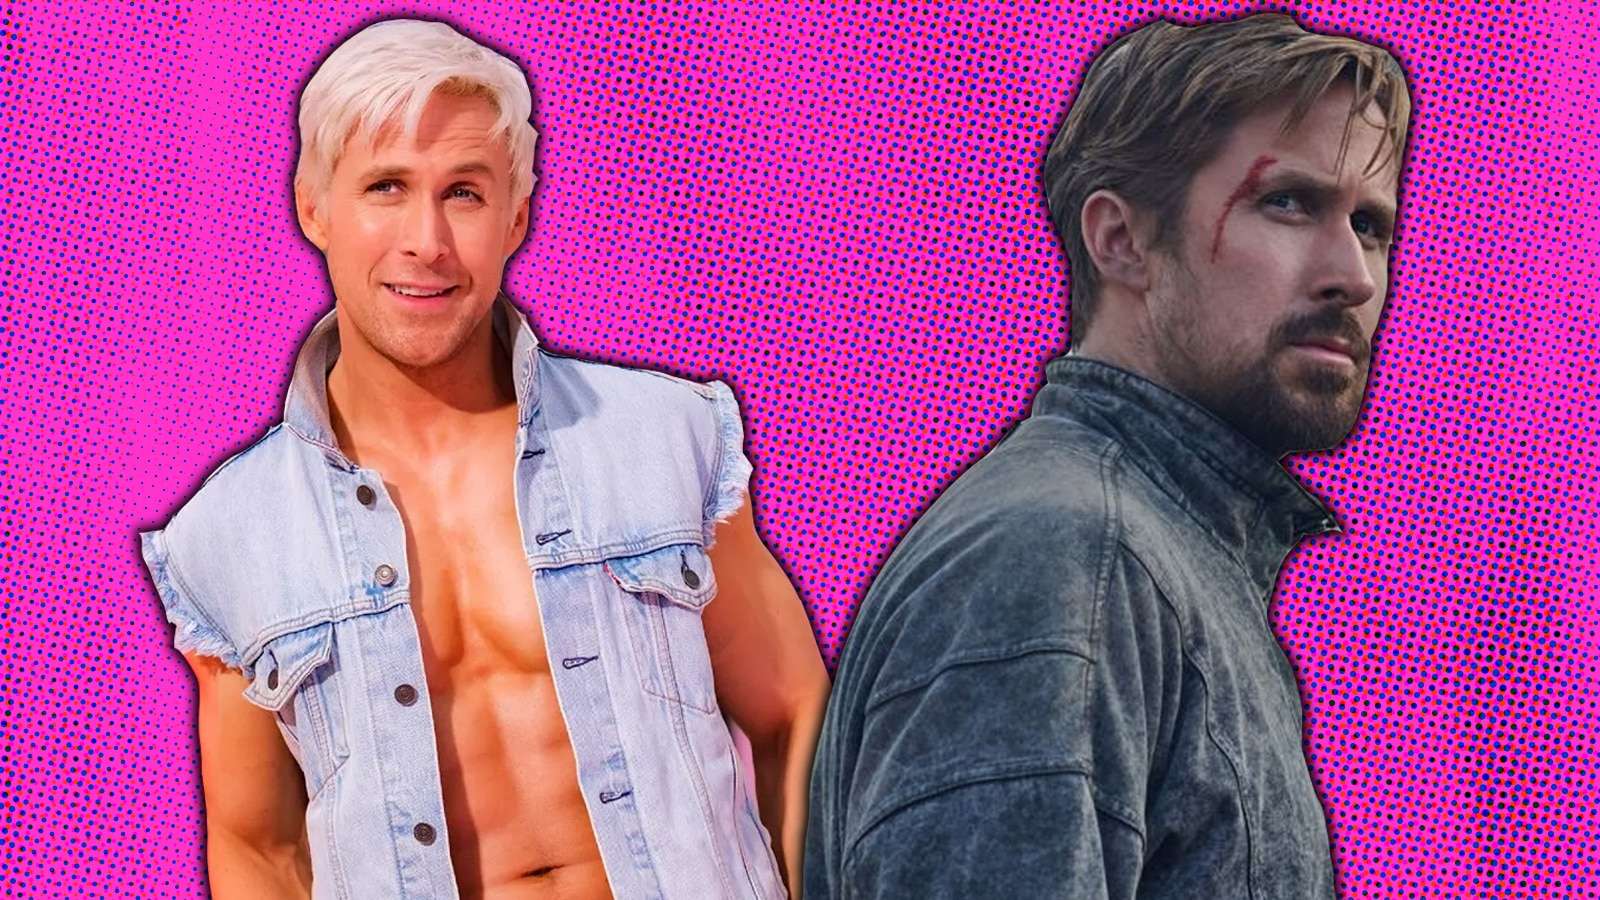 an image of ryan gosling as barbie and in the gray man